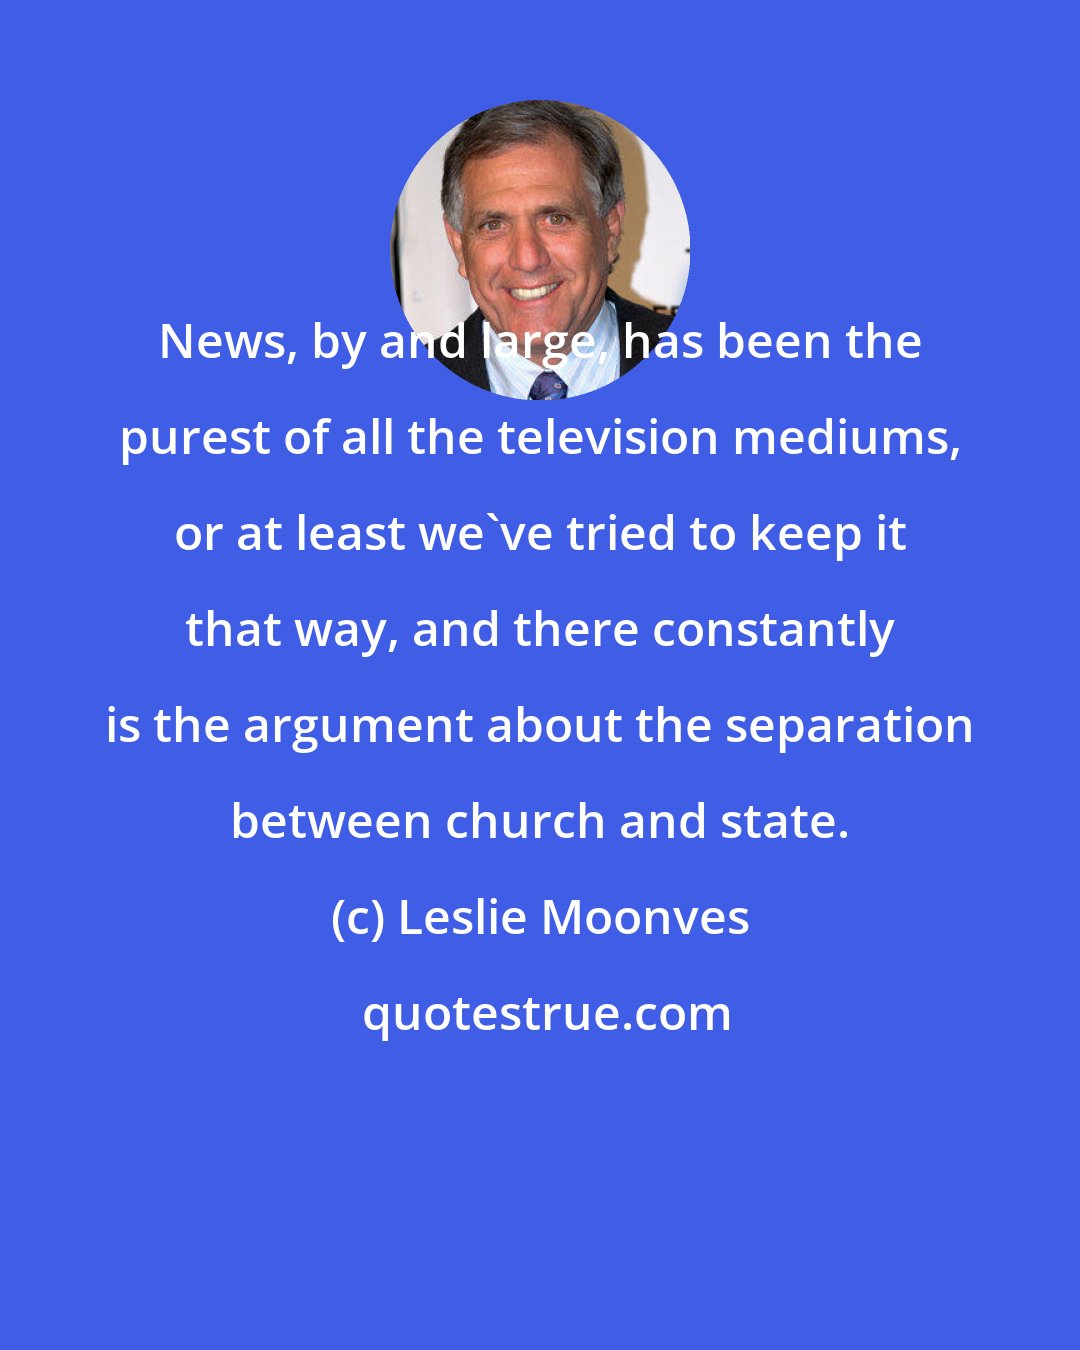 Leslie Moonves: News, by and large, has been the purest of all the television mediums, or at least we've tried to keep it that way, and there constantly is the argument about the separation between church and state.